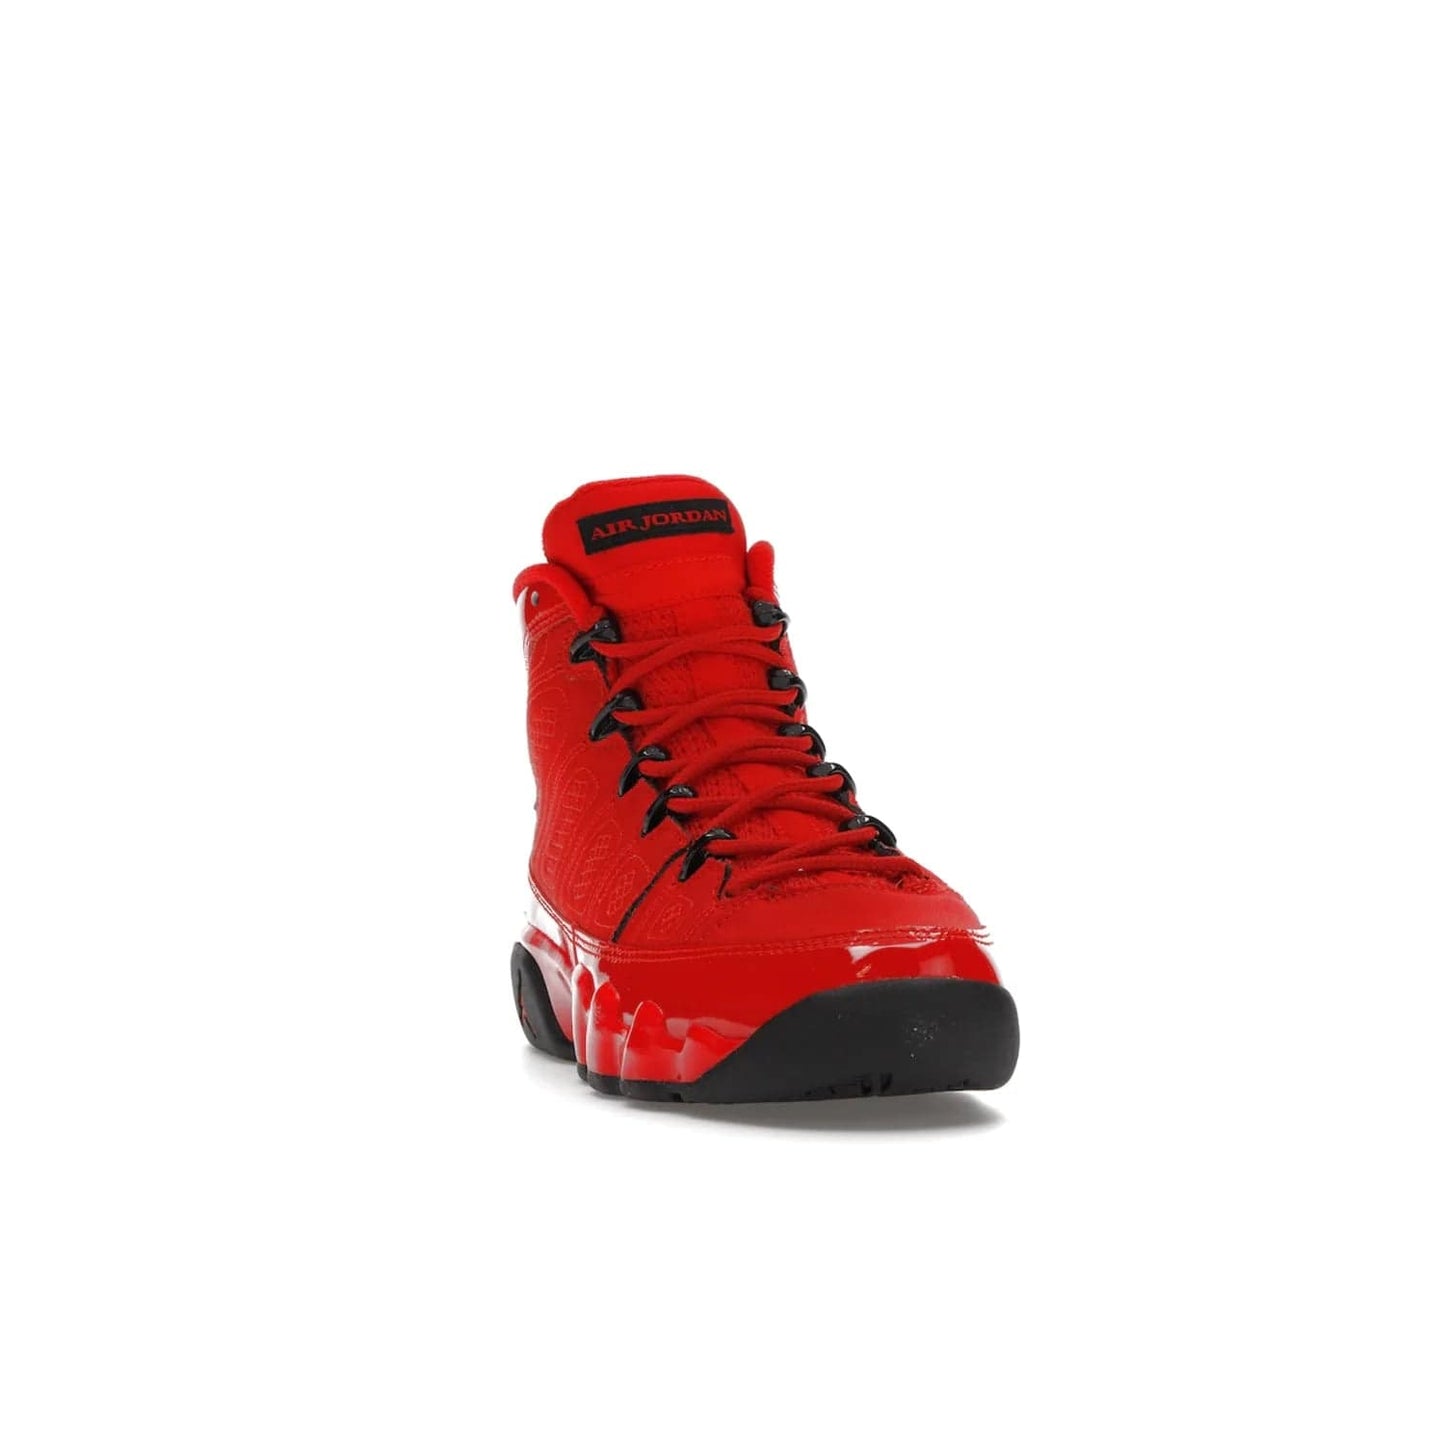 Jordan 9 Retro Chile Red (GS) - Image 8 - Only at www.BallersClubKickz.com - Introducing the Air Jordan 9 Retro Chile Red (GS), a vintage 1993 silhouette with fiery colorway. Features quilted side paneling, glossy patent leather, pull tabs, black contrast accents, and foam midsole. Launching May 2022 for $140.